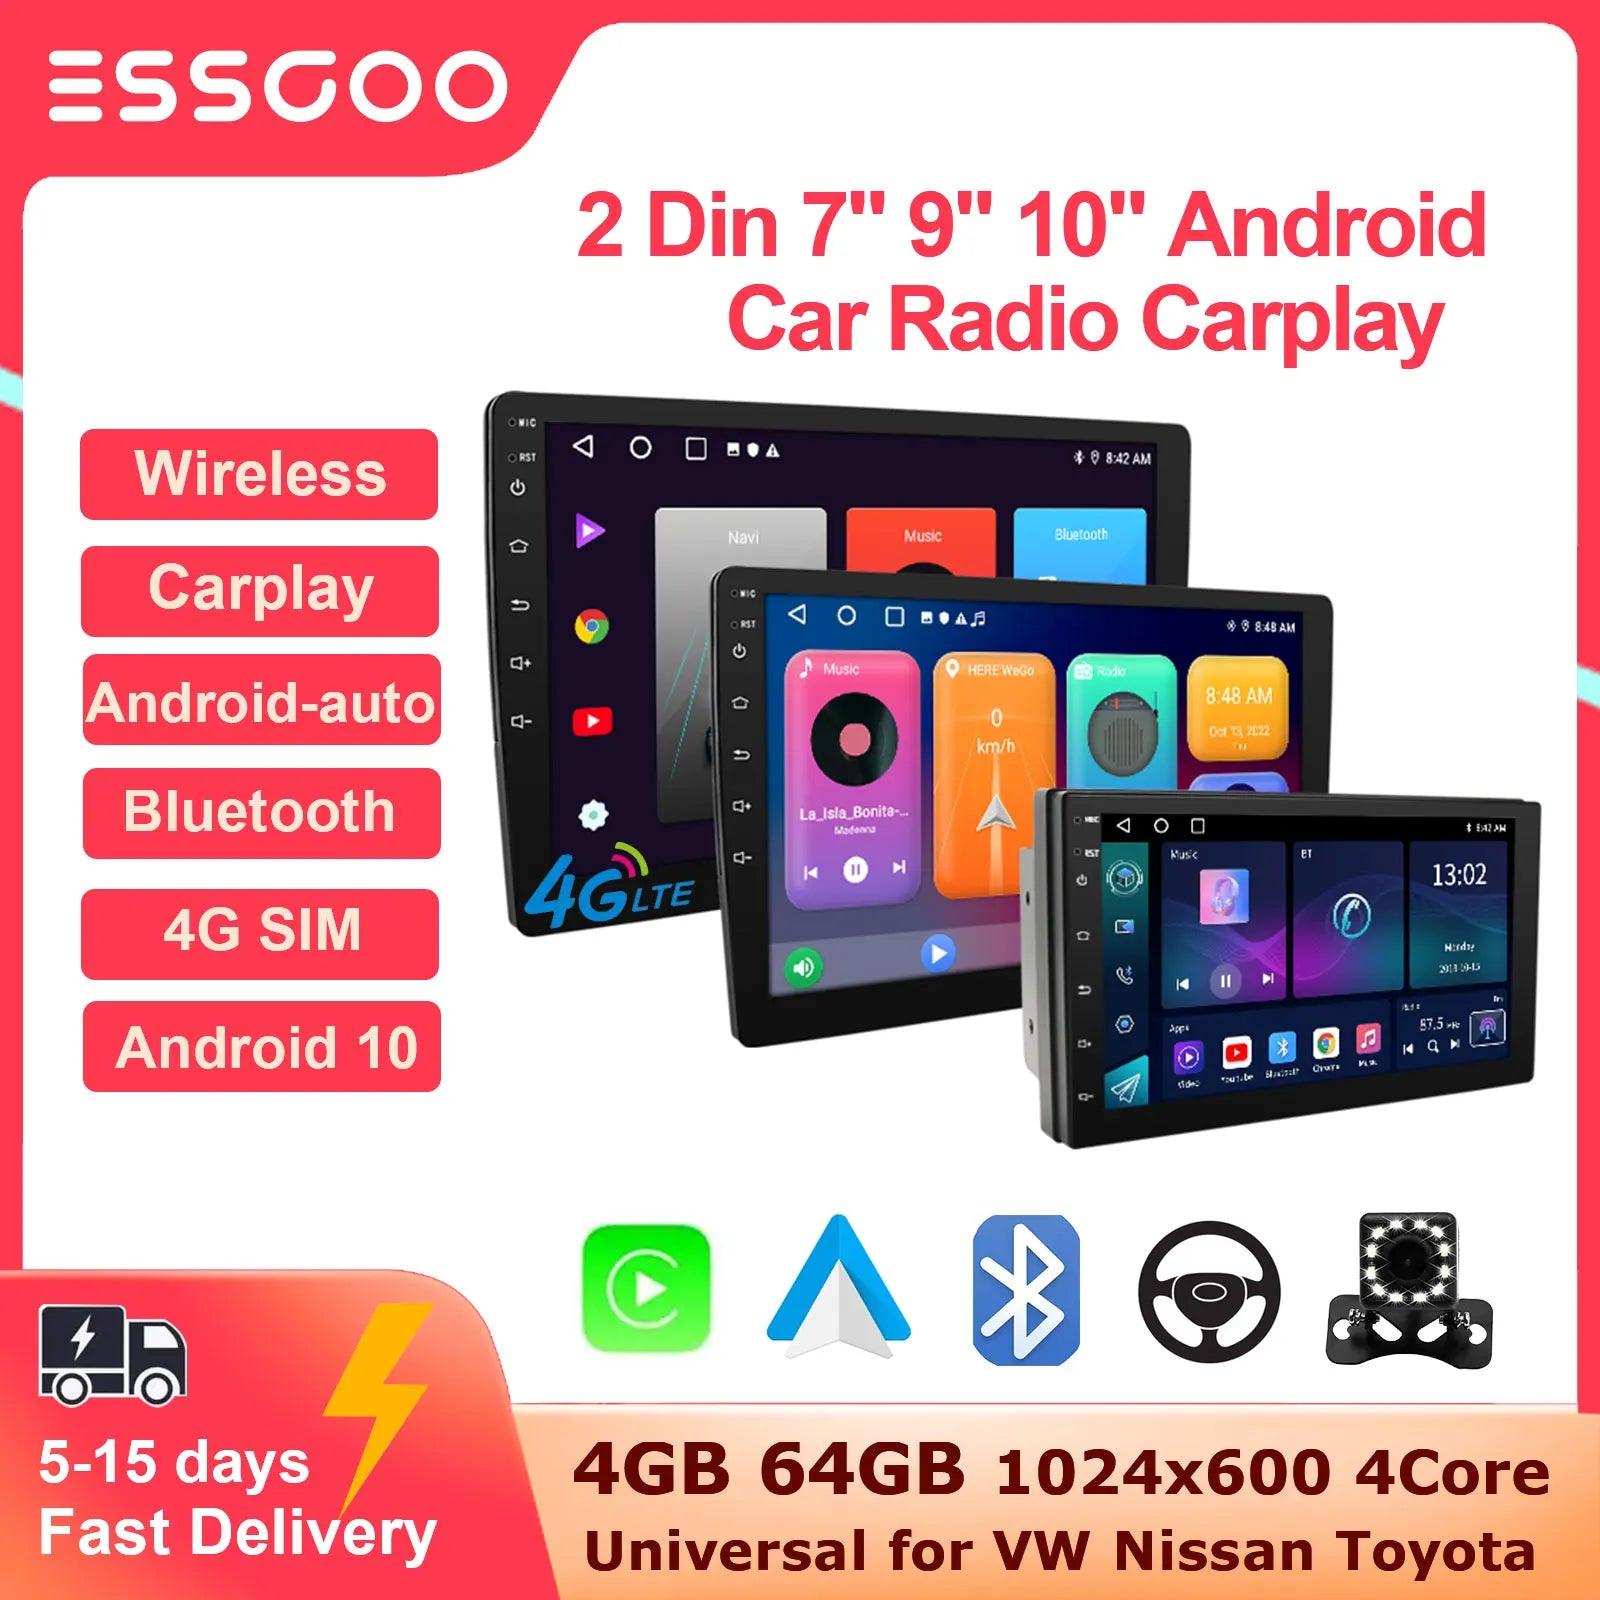 Enhance Your Driving Experience with the ESSGOO Car Multimedia Player  ourlum.com   